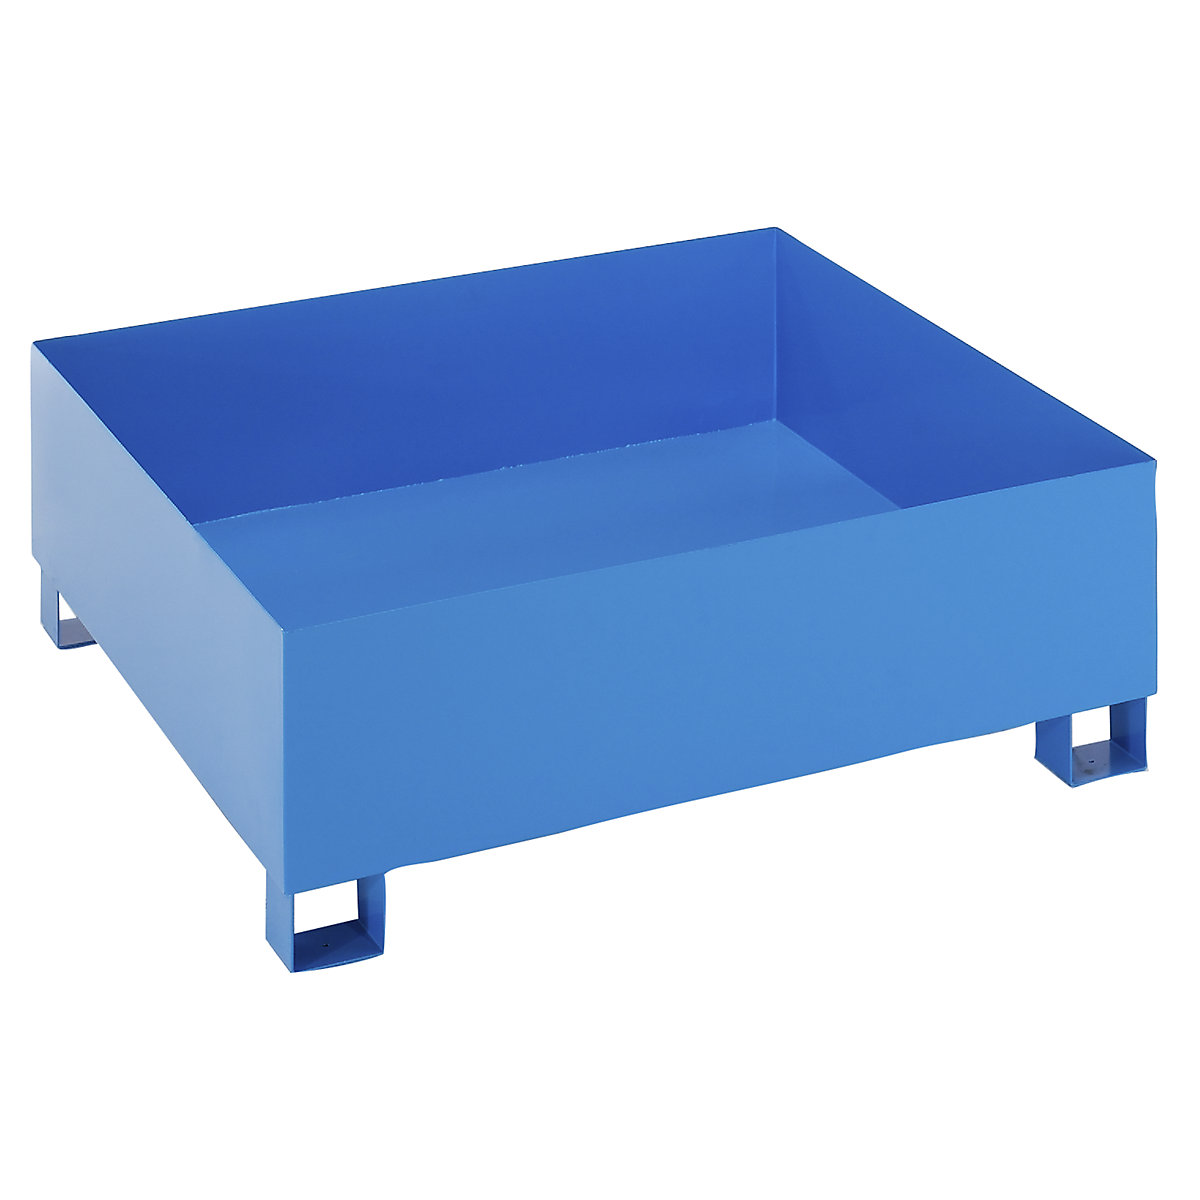 Steel sump tray for 200 l drums – eurokraft basic, LxWxH 1200 x 1200 x 415 mm, with certification, powder coated blue, without grate-4